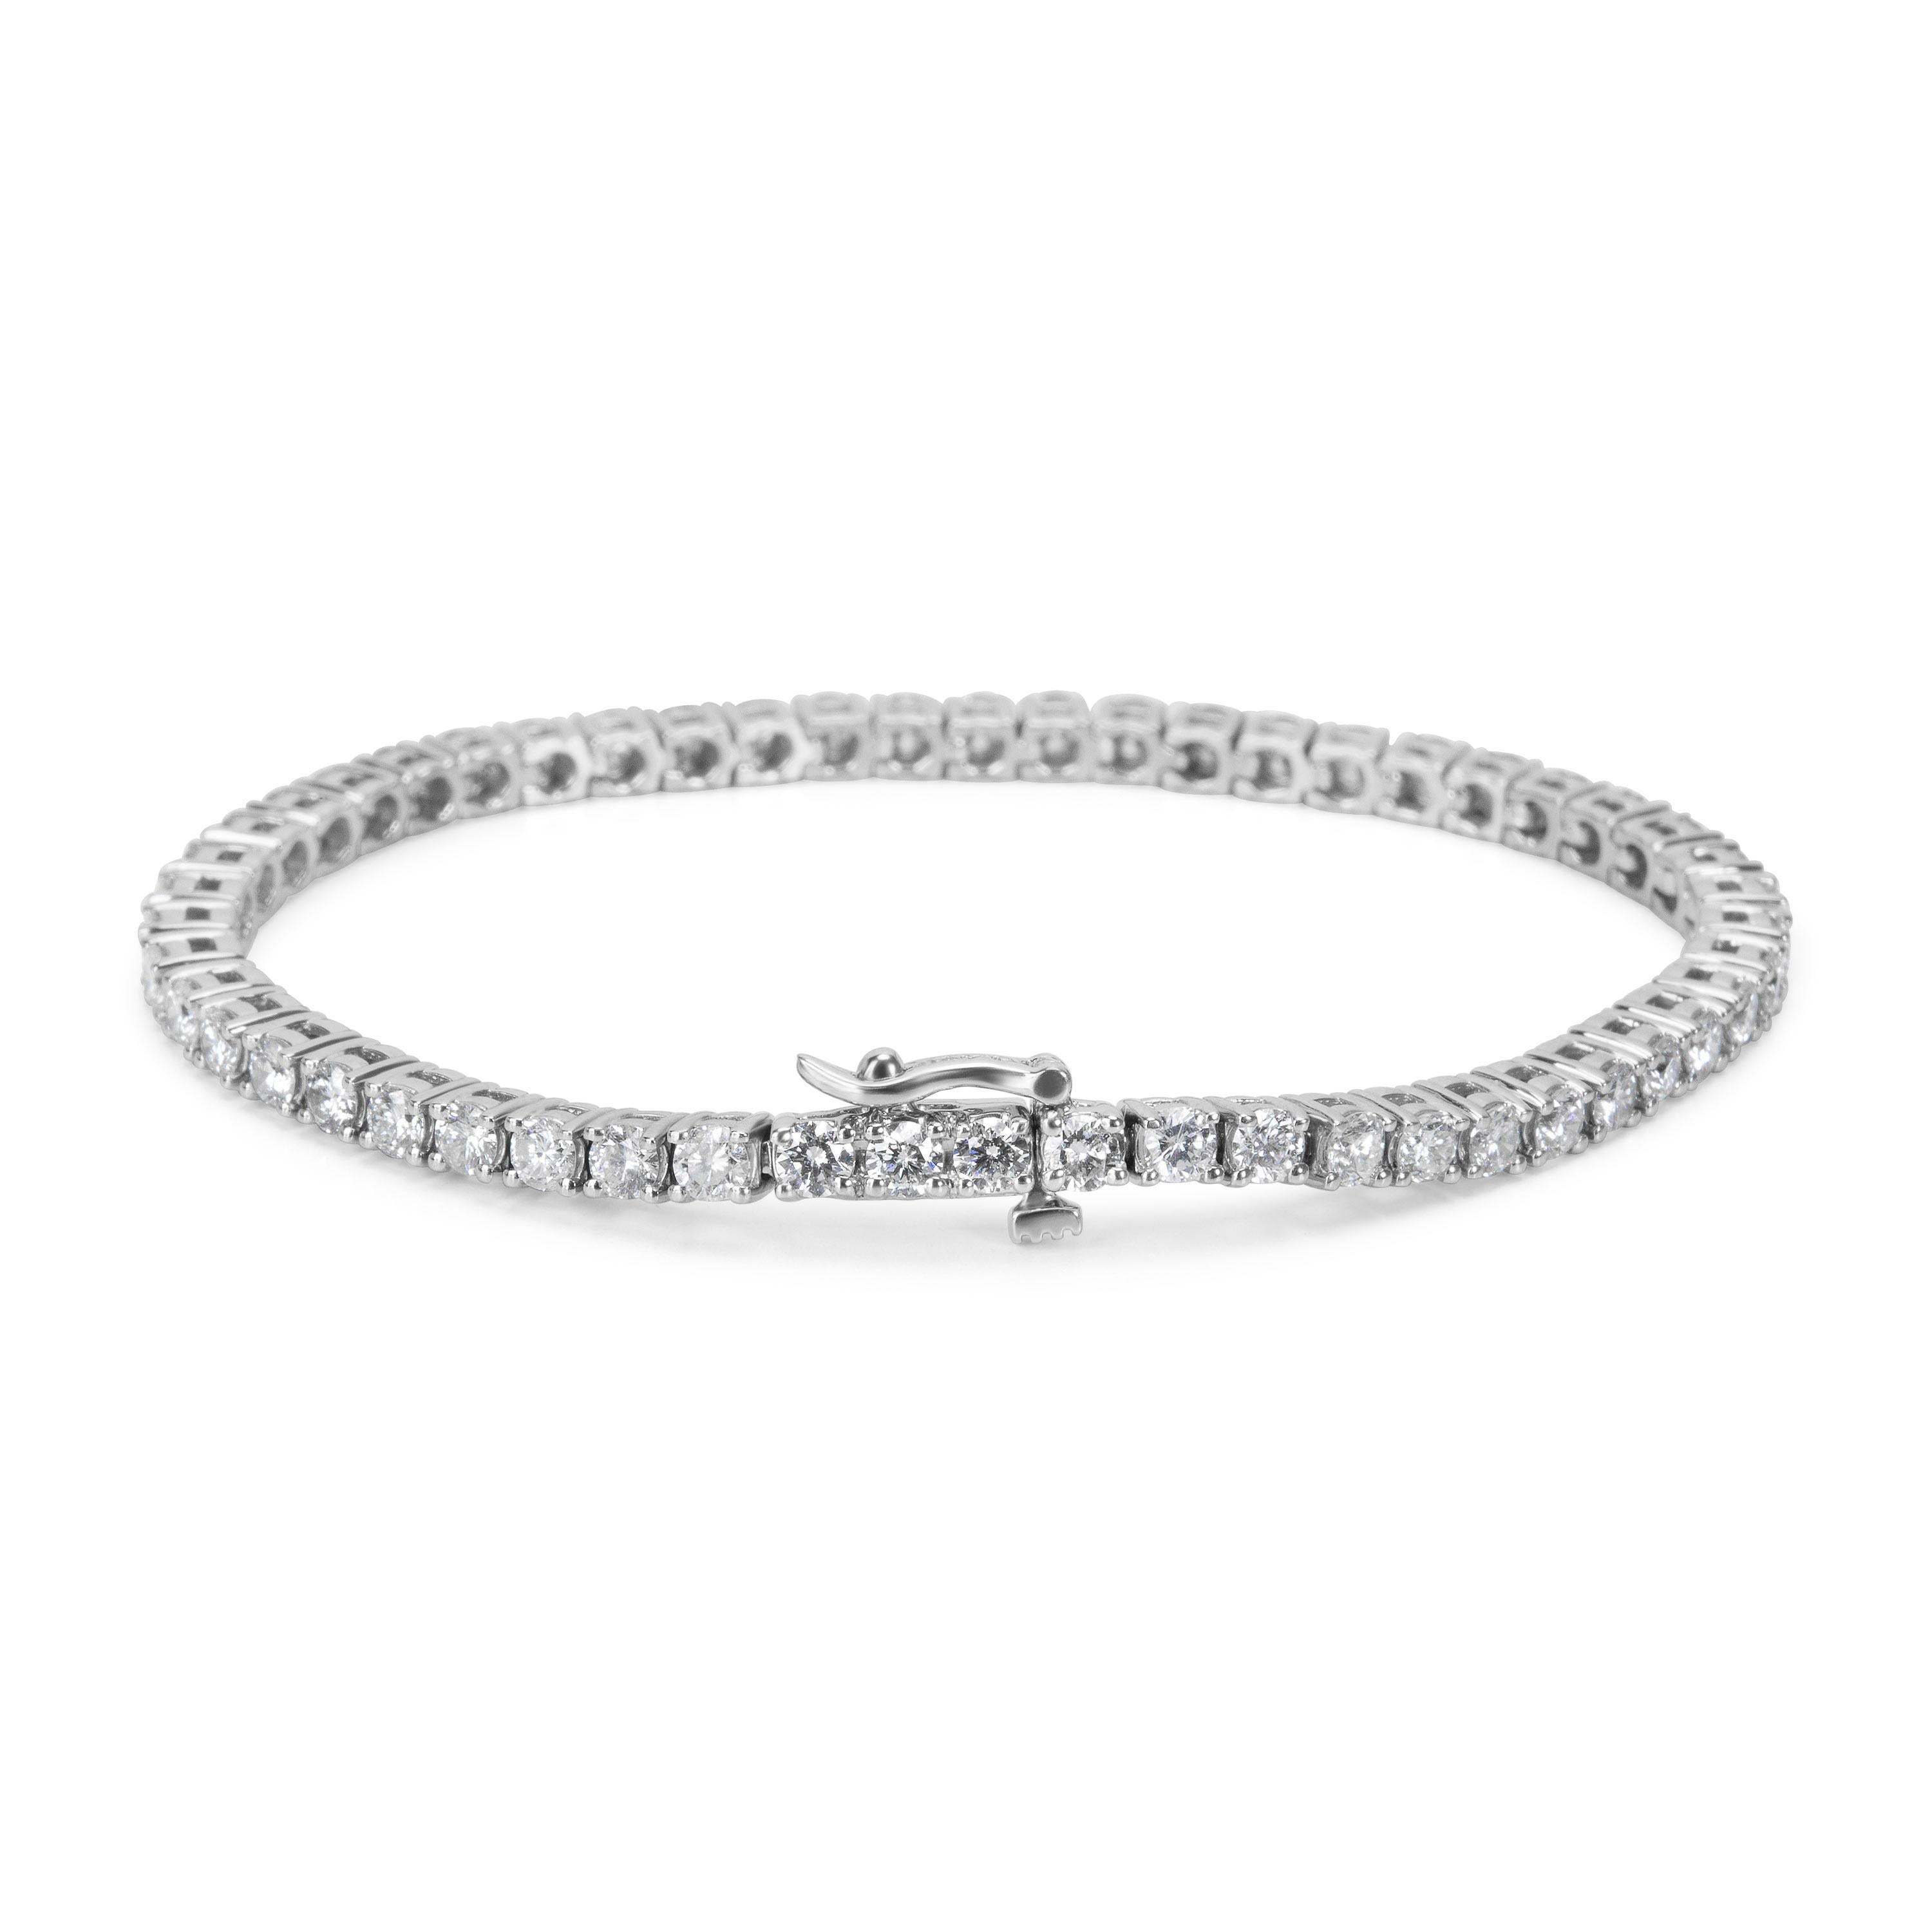 Brand New & unworn.  Bracelet length is 6.75 inches. There are 56 diamonds totaling 4.36 carats set in 14K white gold.

Stone Type: Diamond
# of Diamonds: 56
Stone Weight: 4.36 ctw
Stone Color: G-H
Stone Clarity: SI1-SI2
